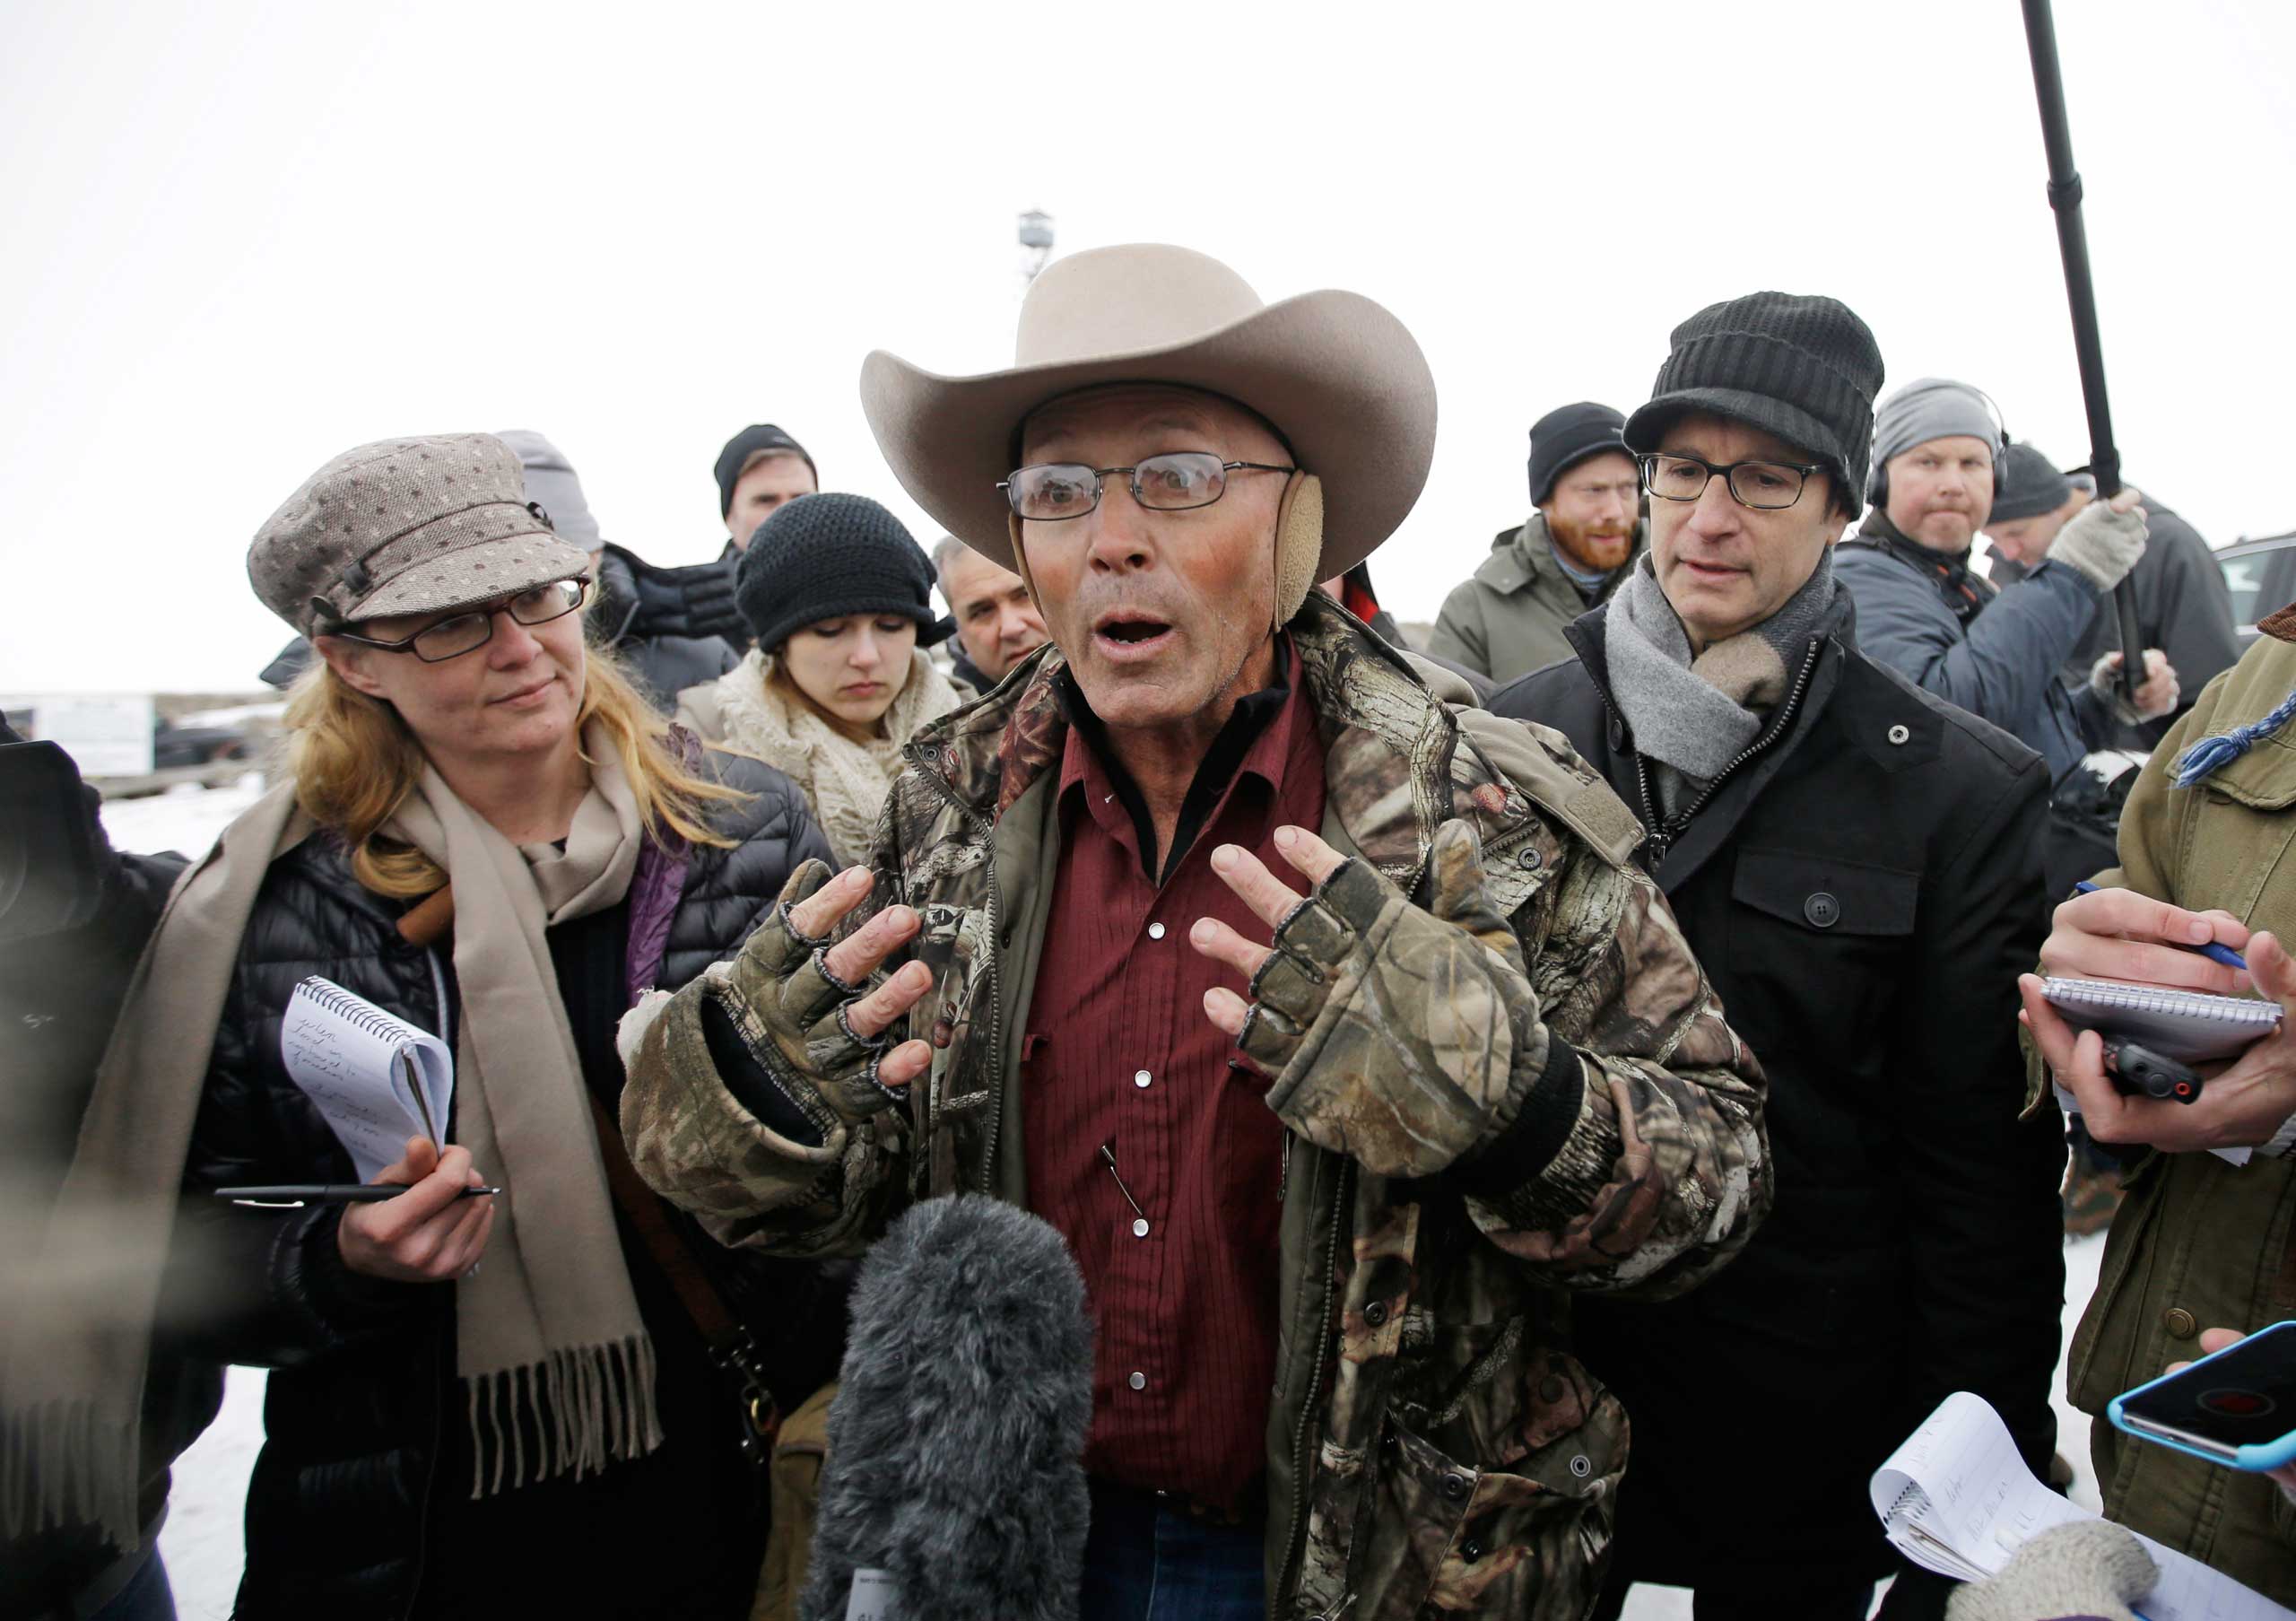 LaVoy Finicum, a rancher from Arizona who is part of the group occupying the Malheur National Wildlife Refuge, speaks during a news conference near Burns, Ore., on Jan. 5, 2016. (Rick Bowmer—AP)